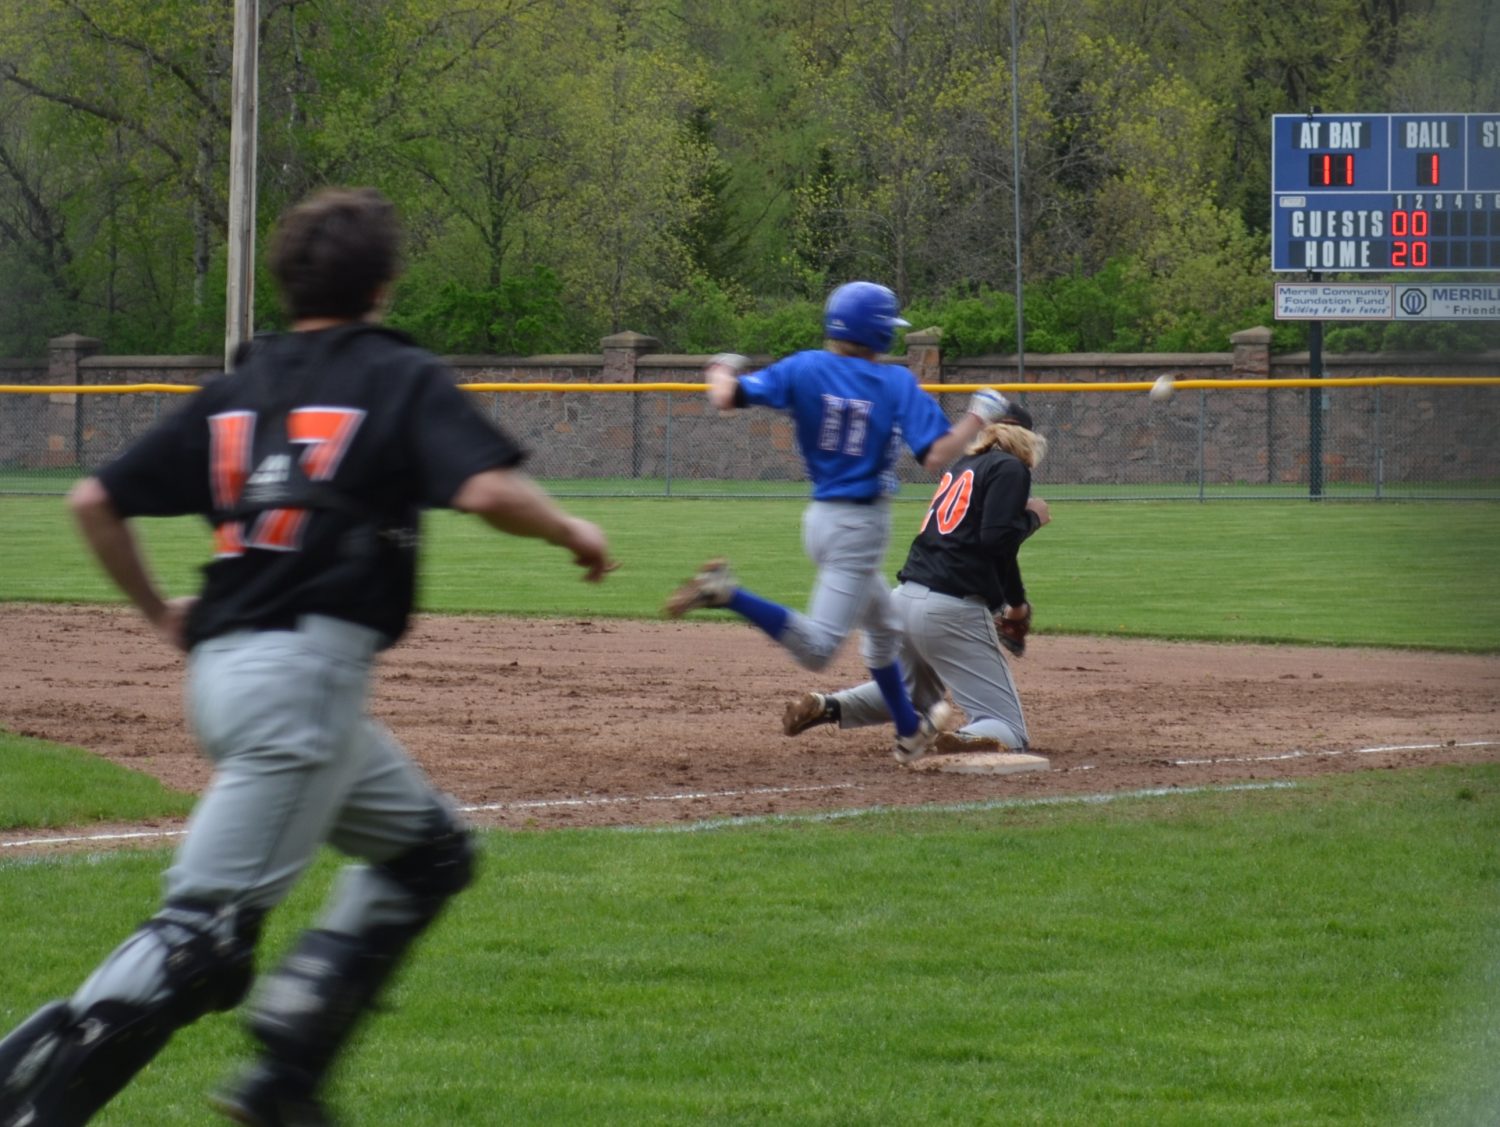 Bluejay doubleheader sees a loss and a win